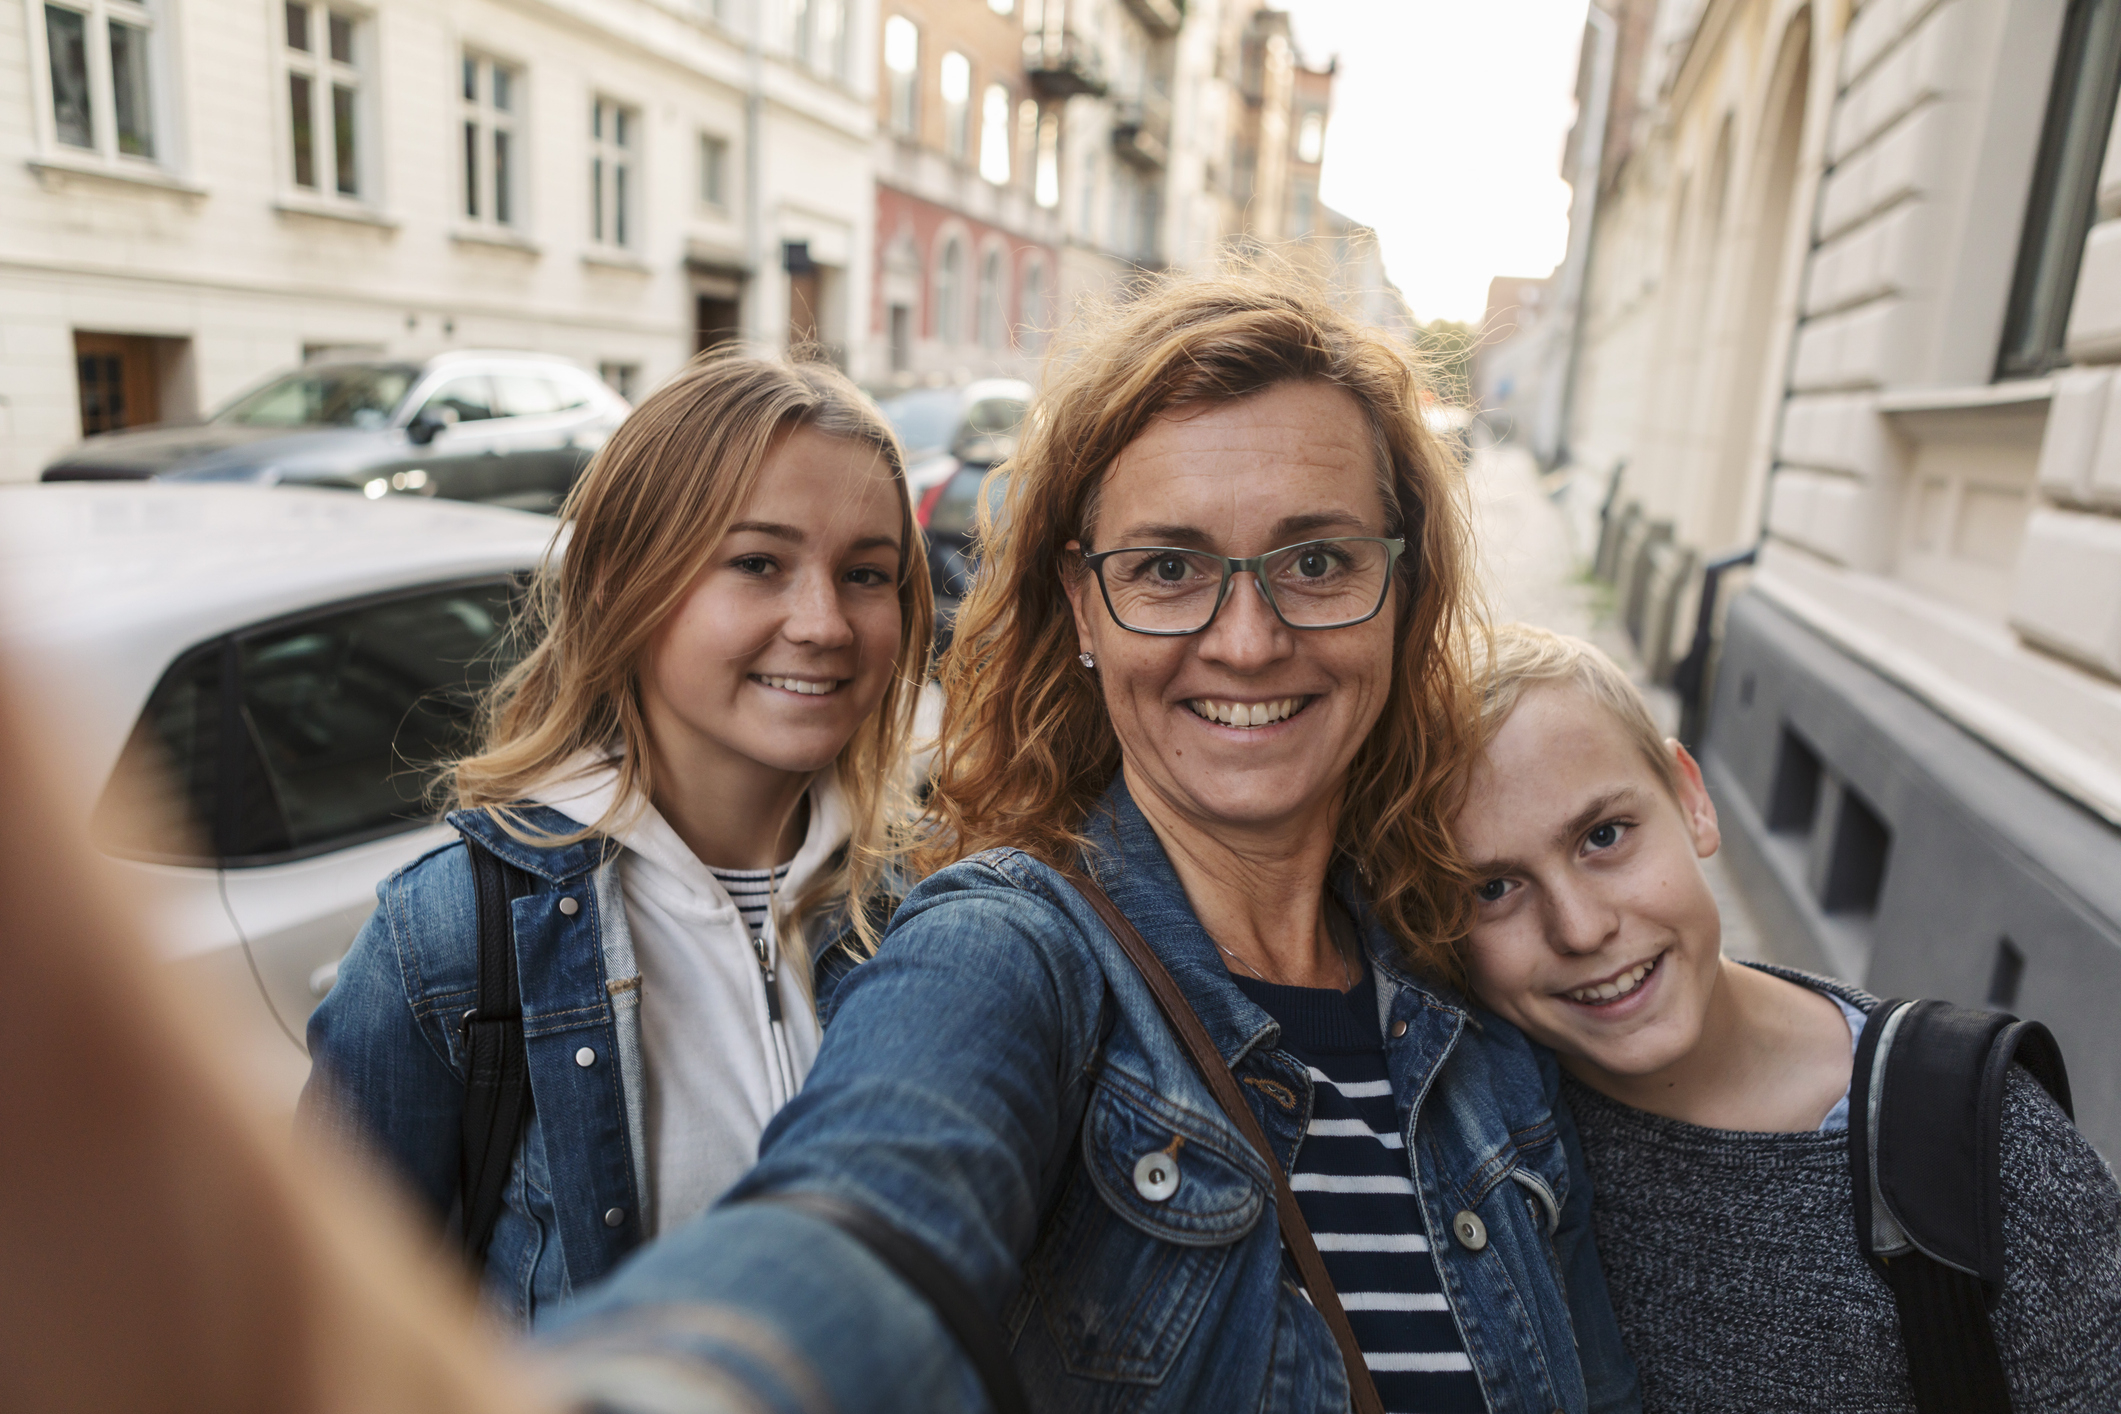 Three people in a selfie, two young and one middle-aged, smiling on a city street